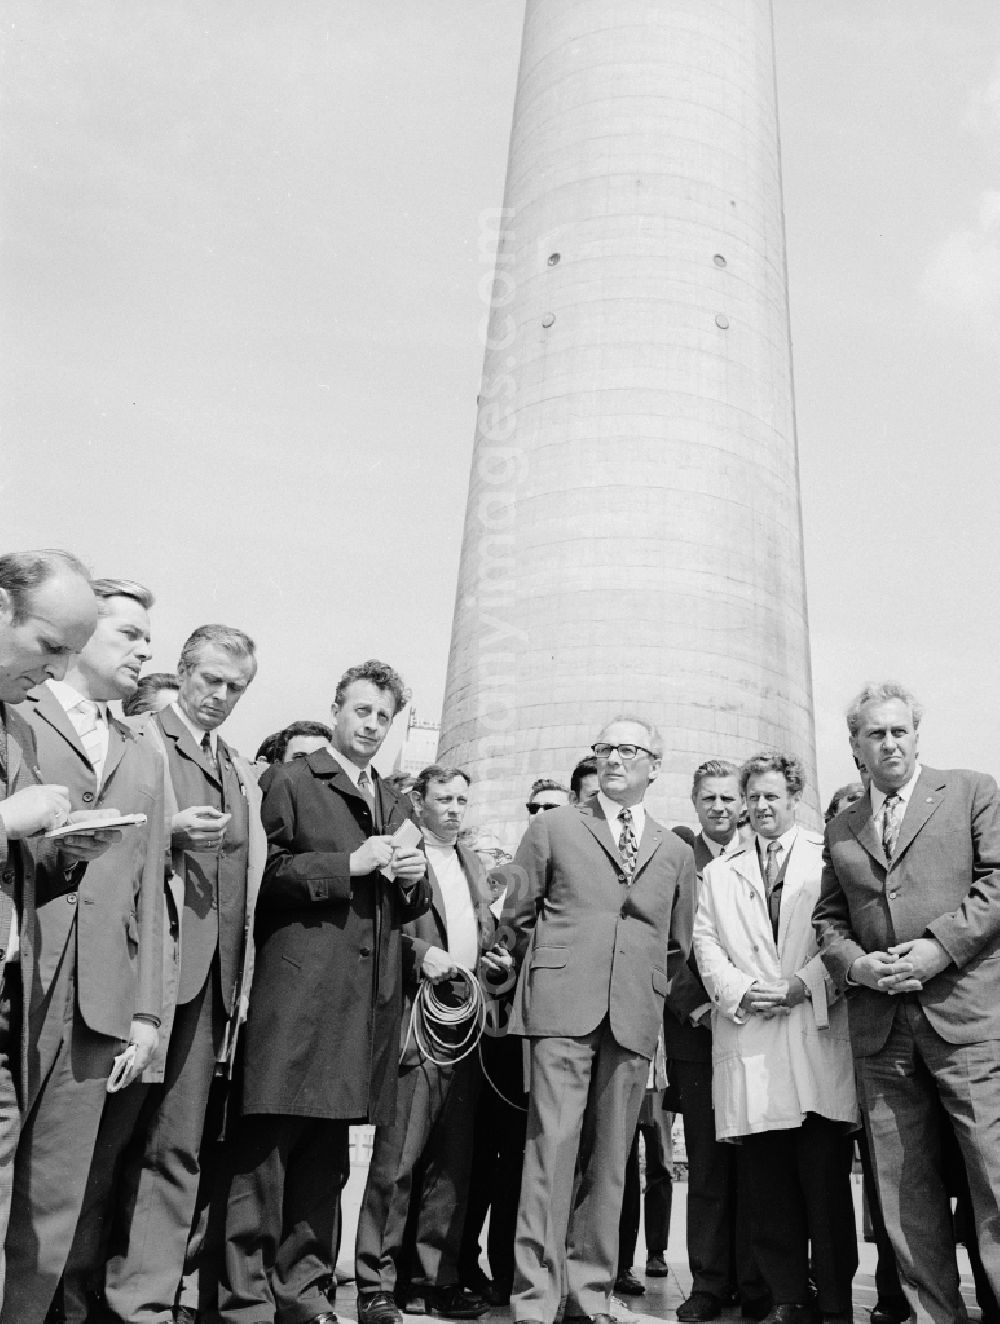 GDR photo archive: Berlin - Erich Honecker, secretary general of the central committee ZK of the SED socialist united party of Germany and chairpersons of the council of state visited building sites and facilities of the house building in the capital of Berlin, the former capital of the GDR, German democratic republic. Here in the Berlin television tower in the centre of the East Berlin